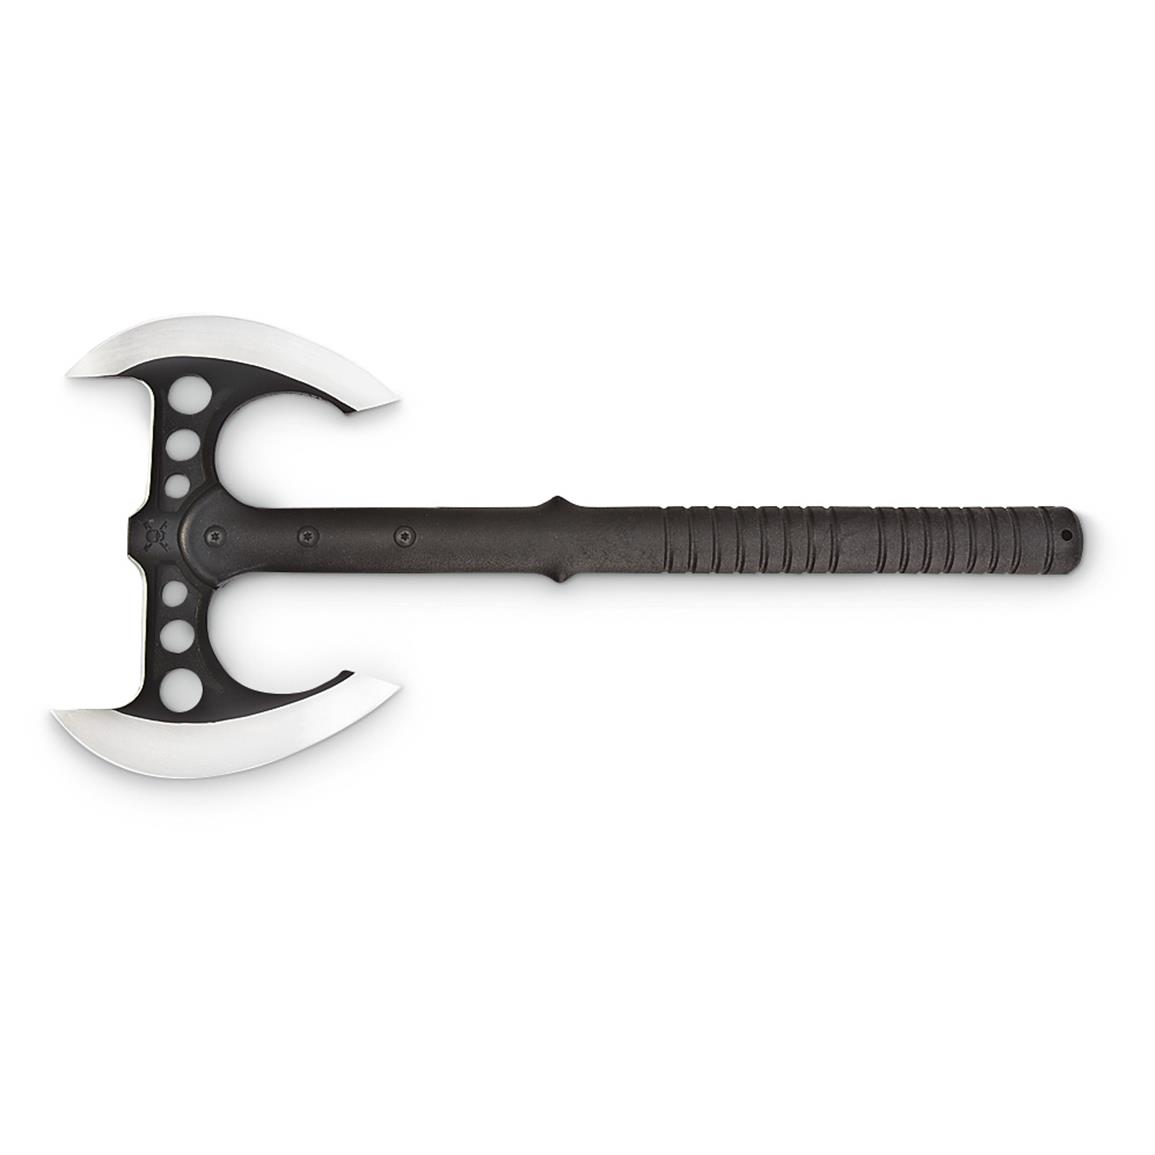 United Cutlery M48 Double-Bladed Tomahawk - 643329, Saws, Axes ...